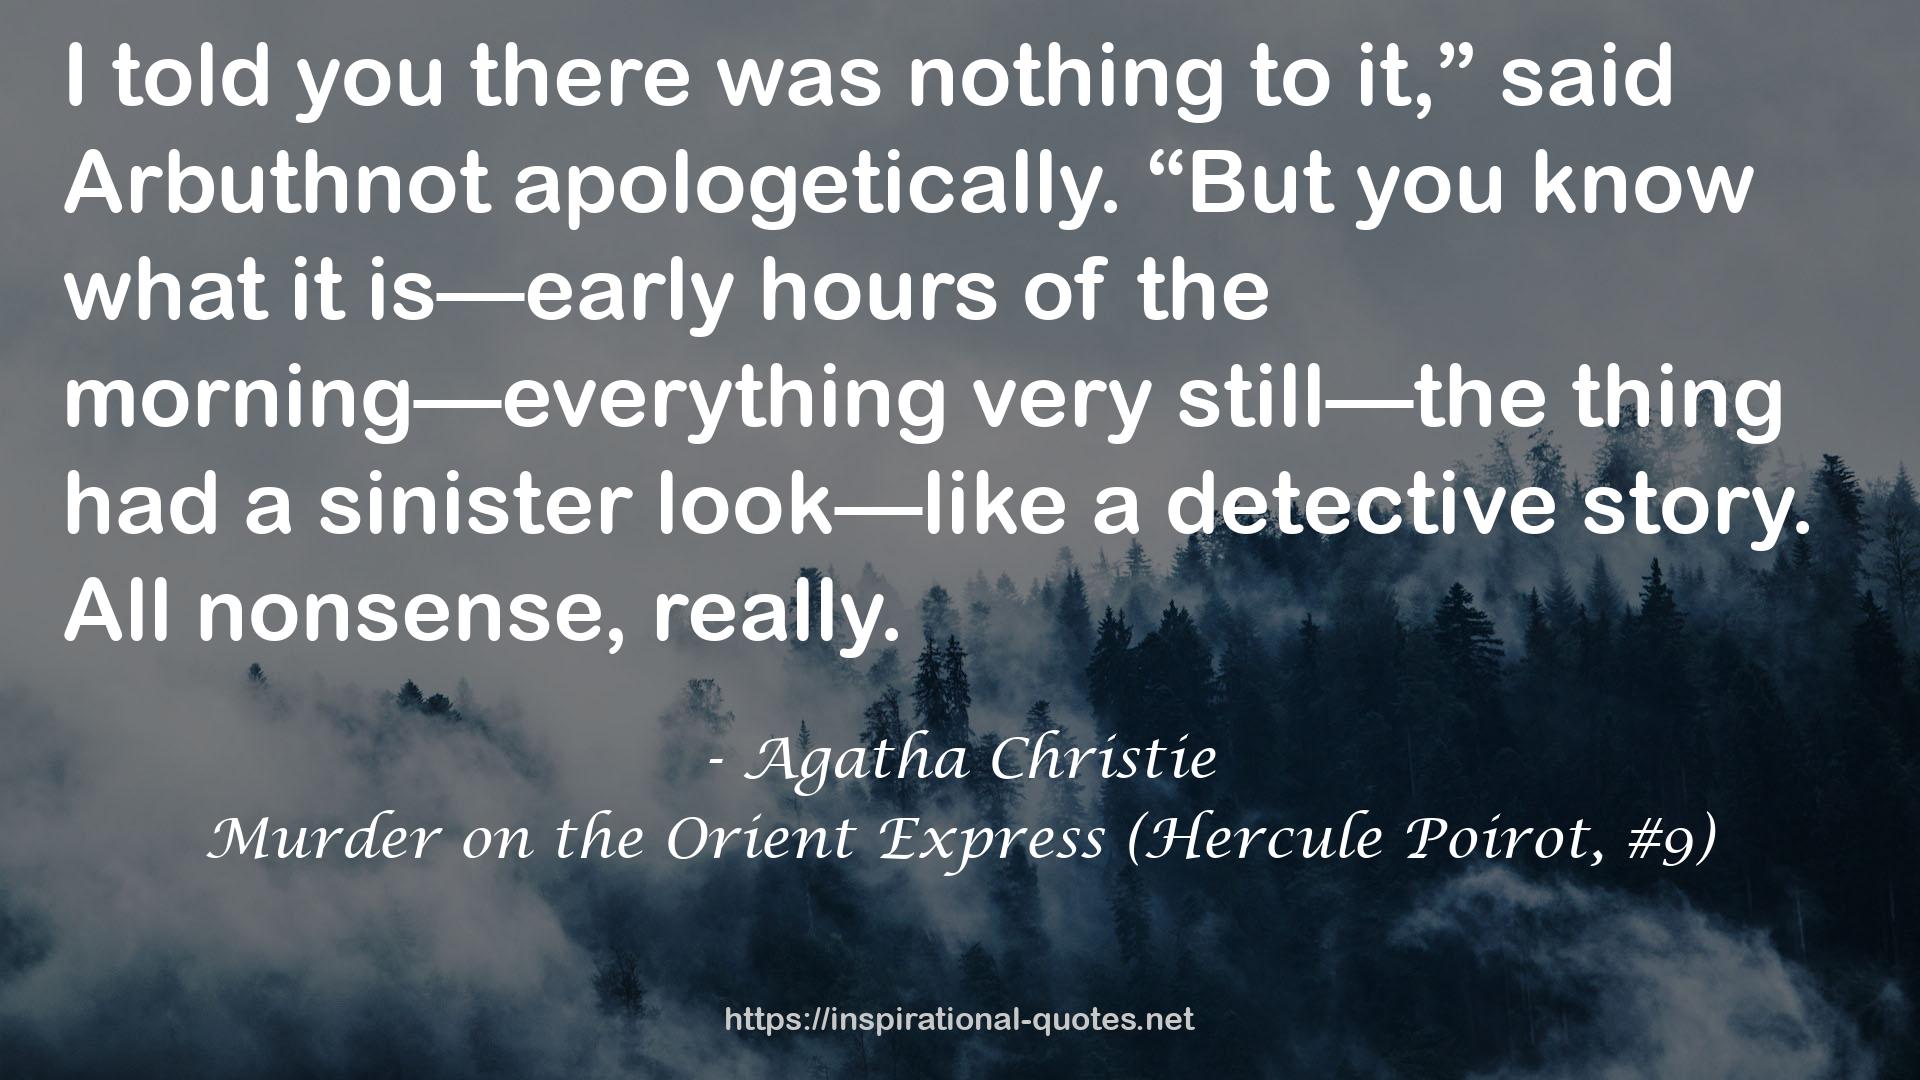 Murder on the Orient Express (Hercule Poirot, #9) QUOTES